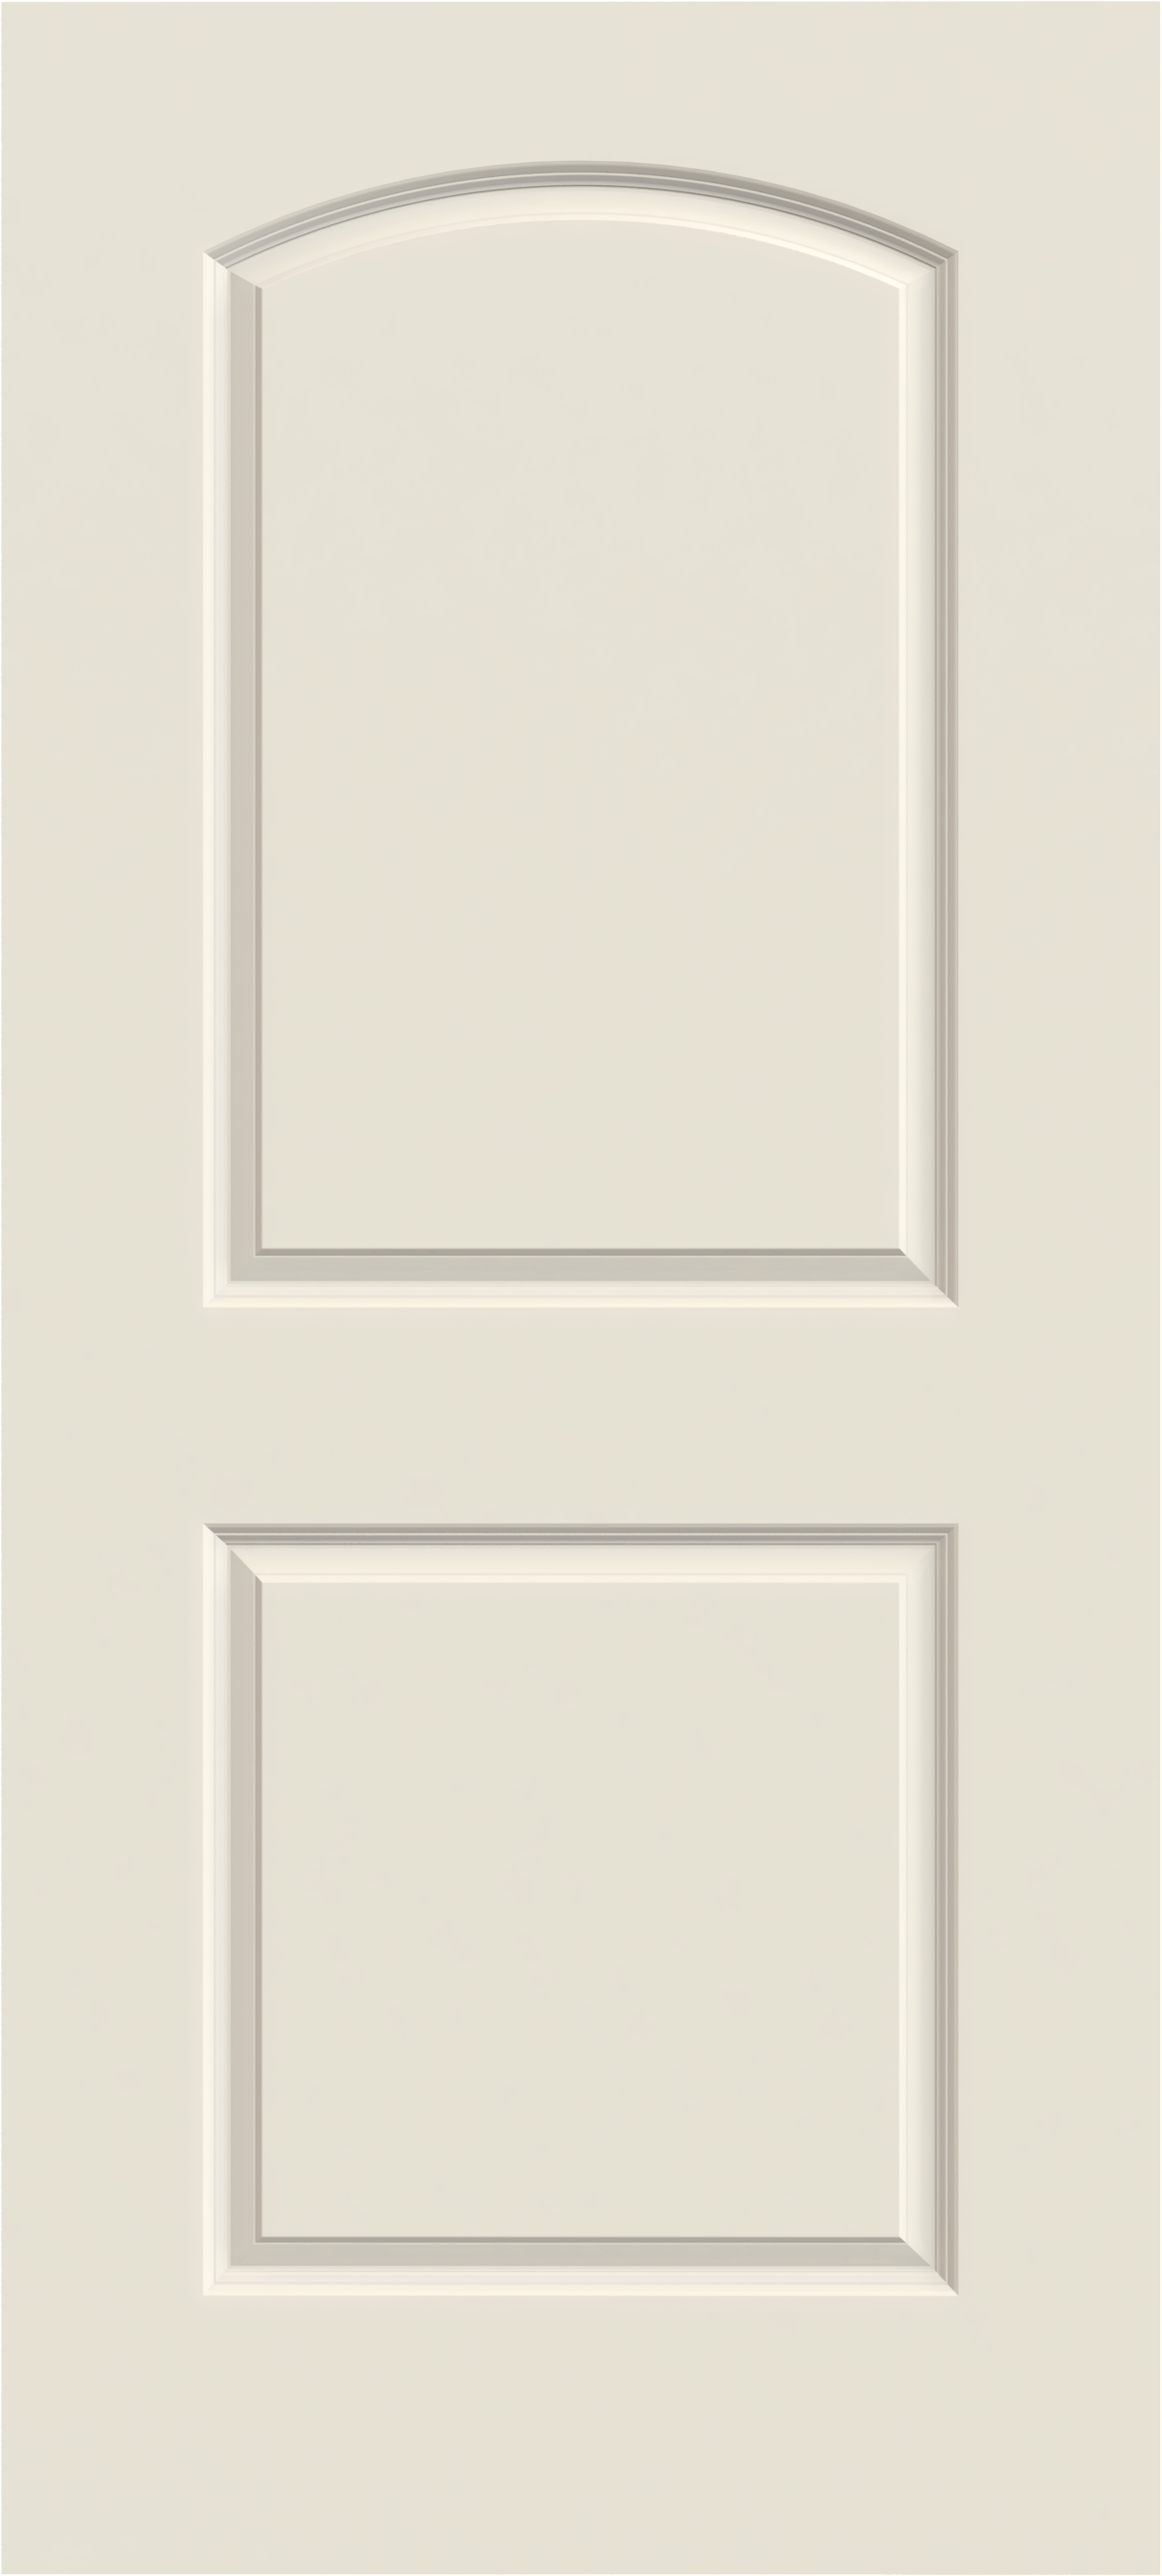 Raised-panel interior door features three-dimensional molding for added depth and an elegant arch in the top panel